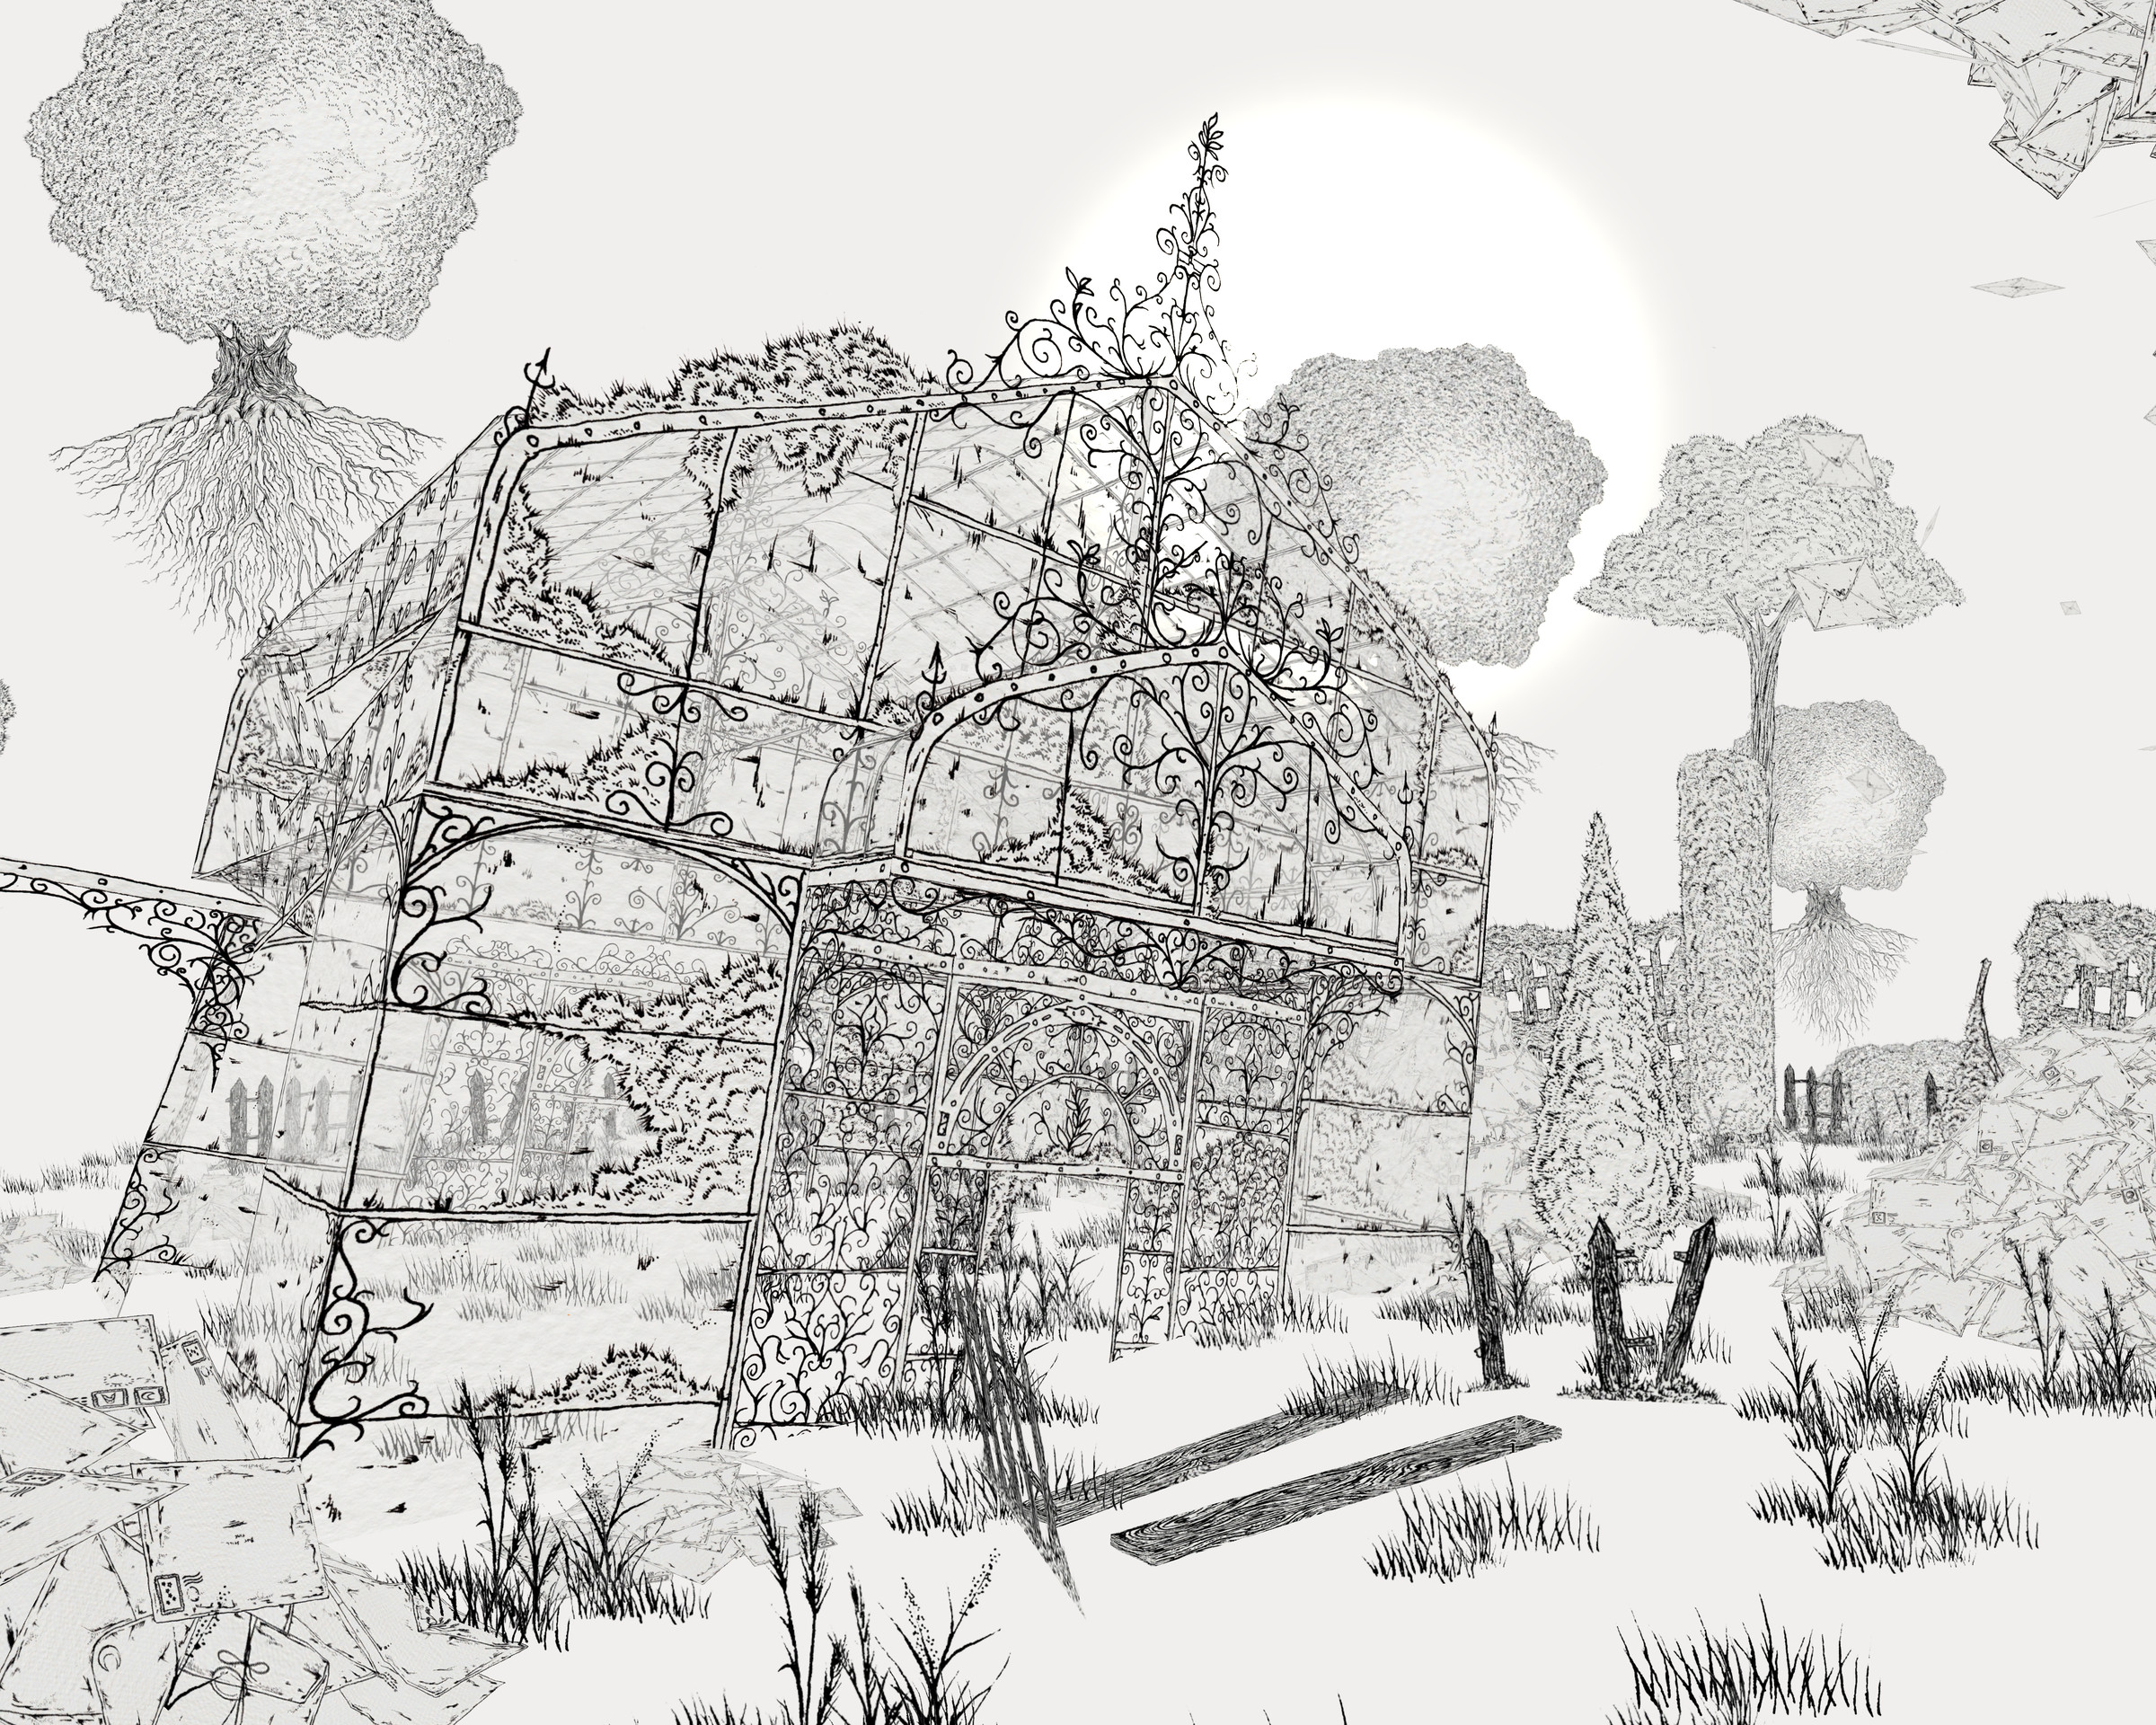 A screenshot from the video game The Collage Atlas.